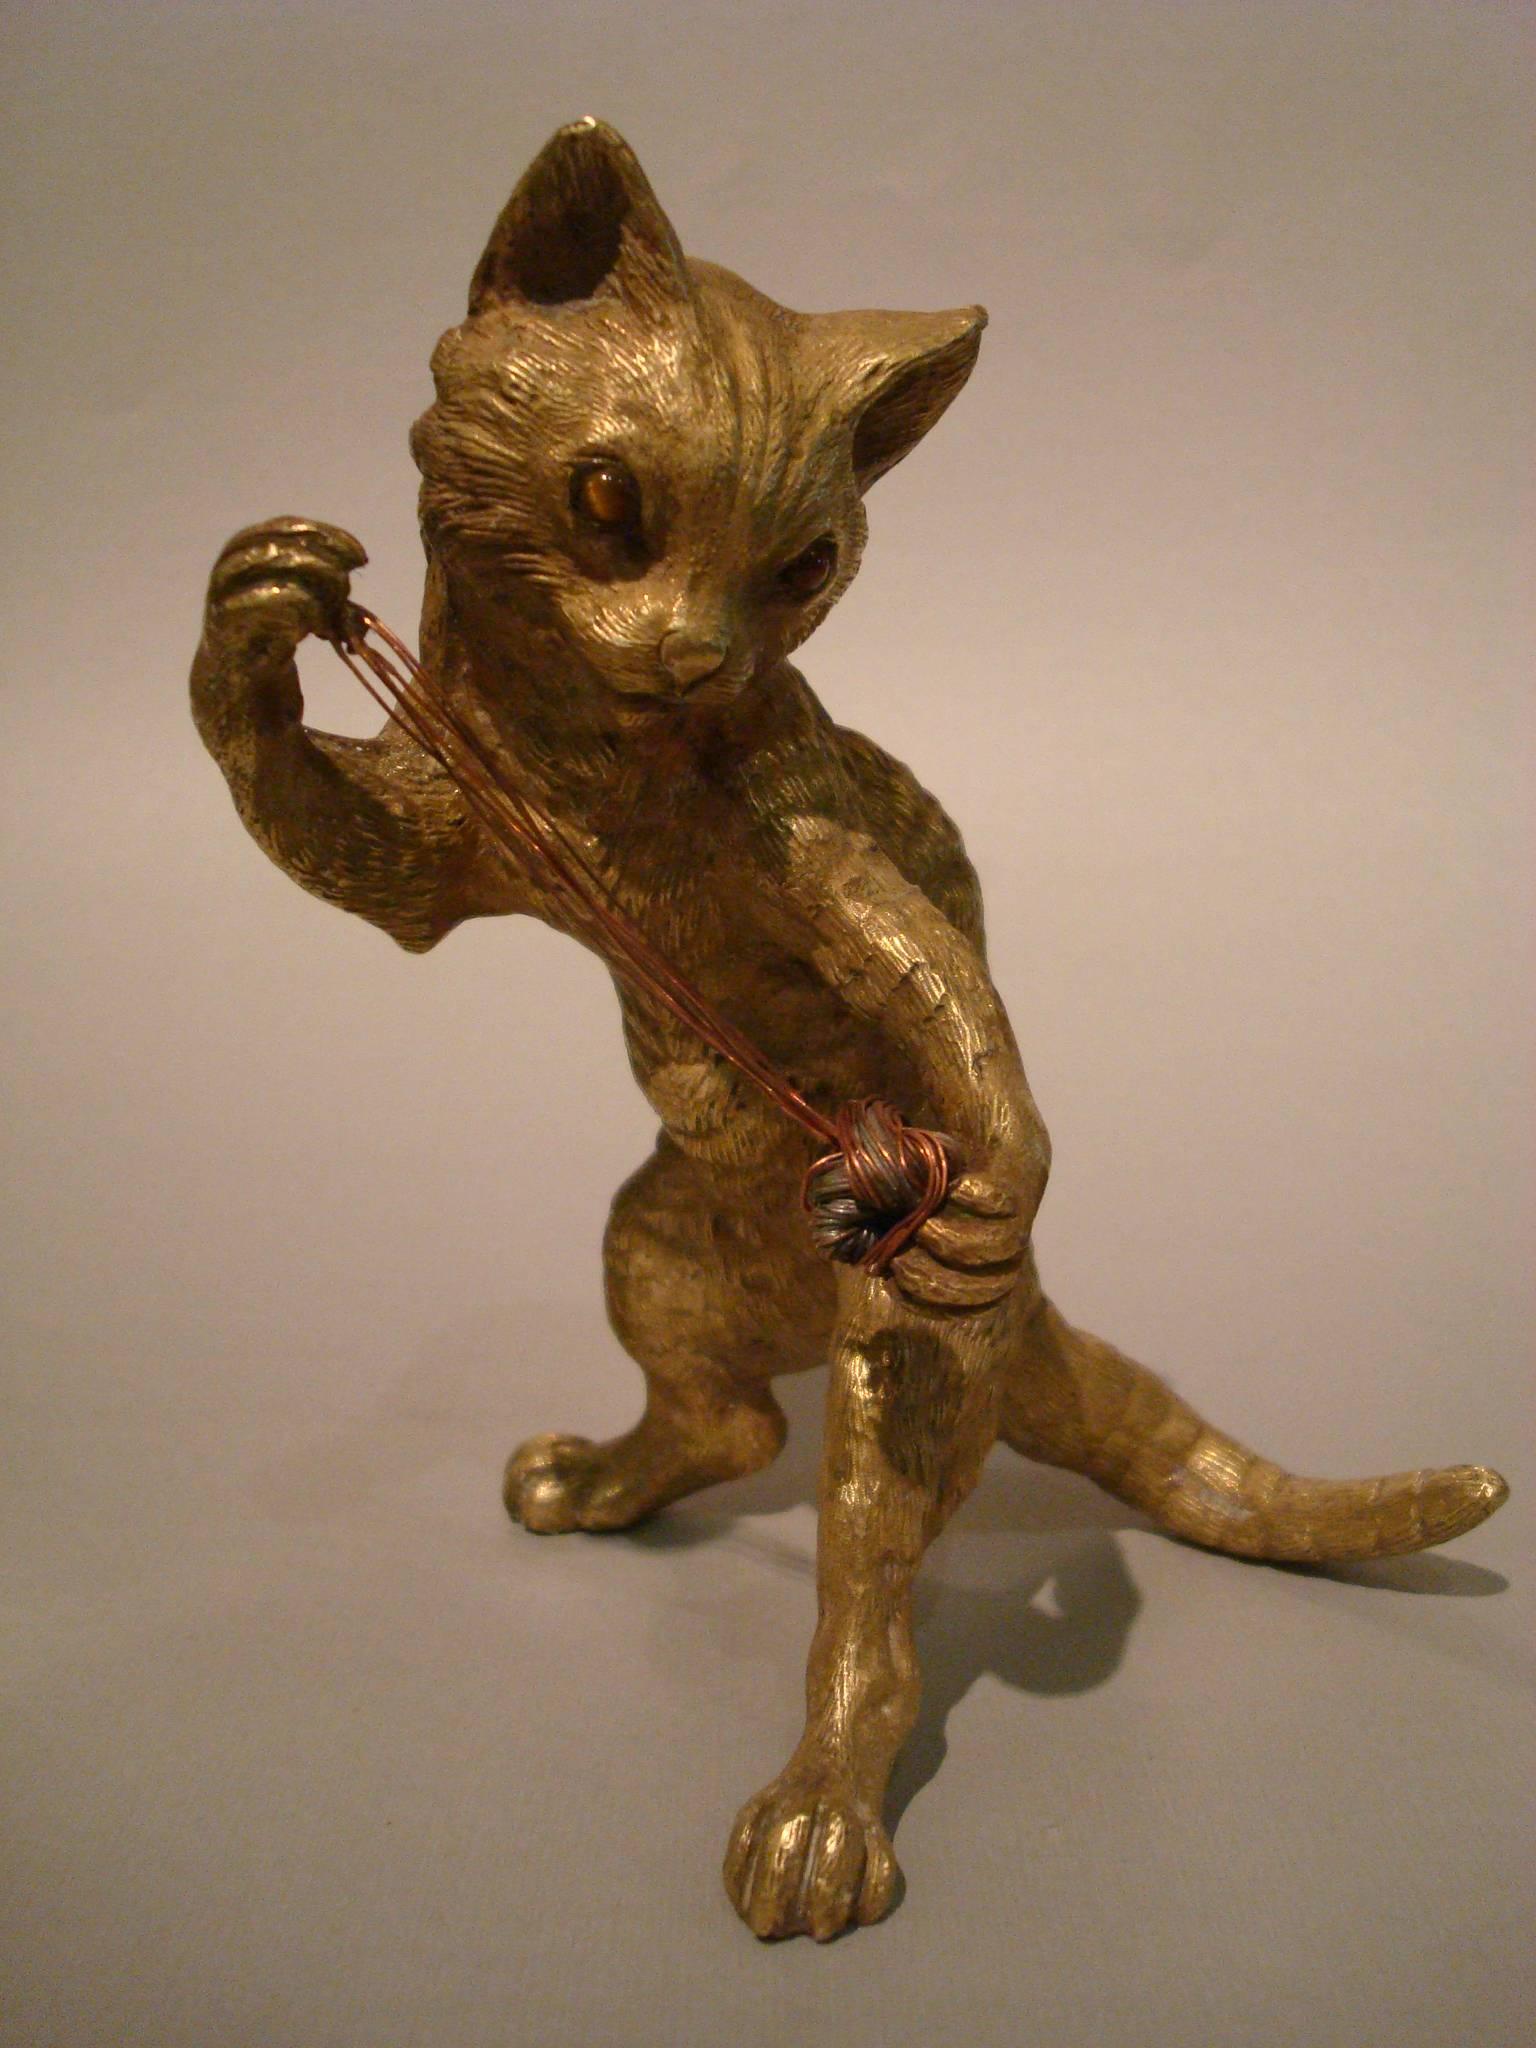 Very detailed Vienna gilt bronze figure of a playing cat.
The cat has stone eyes.